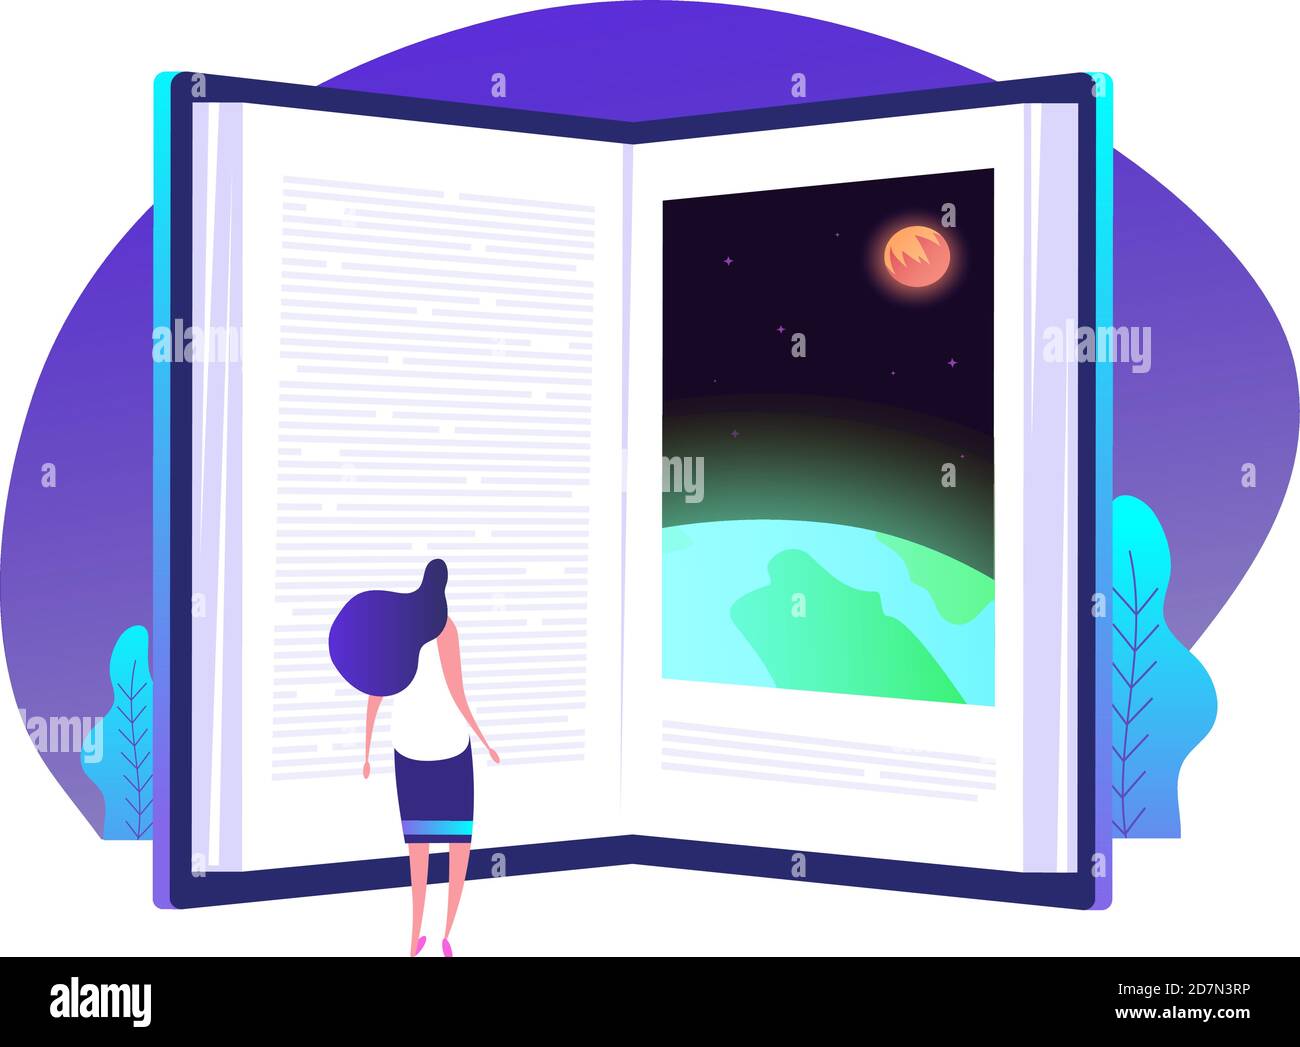 Book knowledge concept. Books door to knowledge global library education teaching learning world business vector background. Illustration of open door to literature, imagination reading Stock Vector